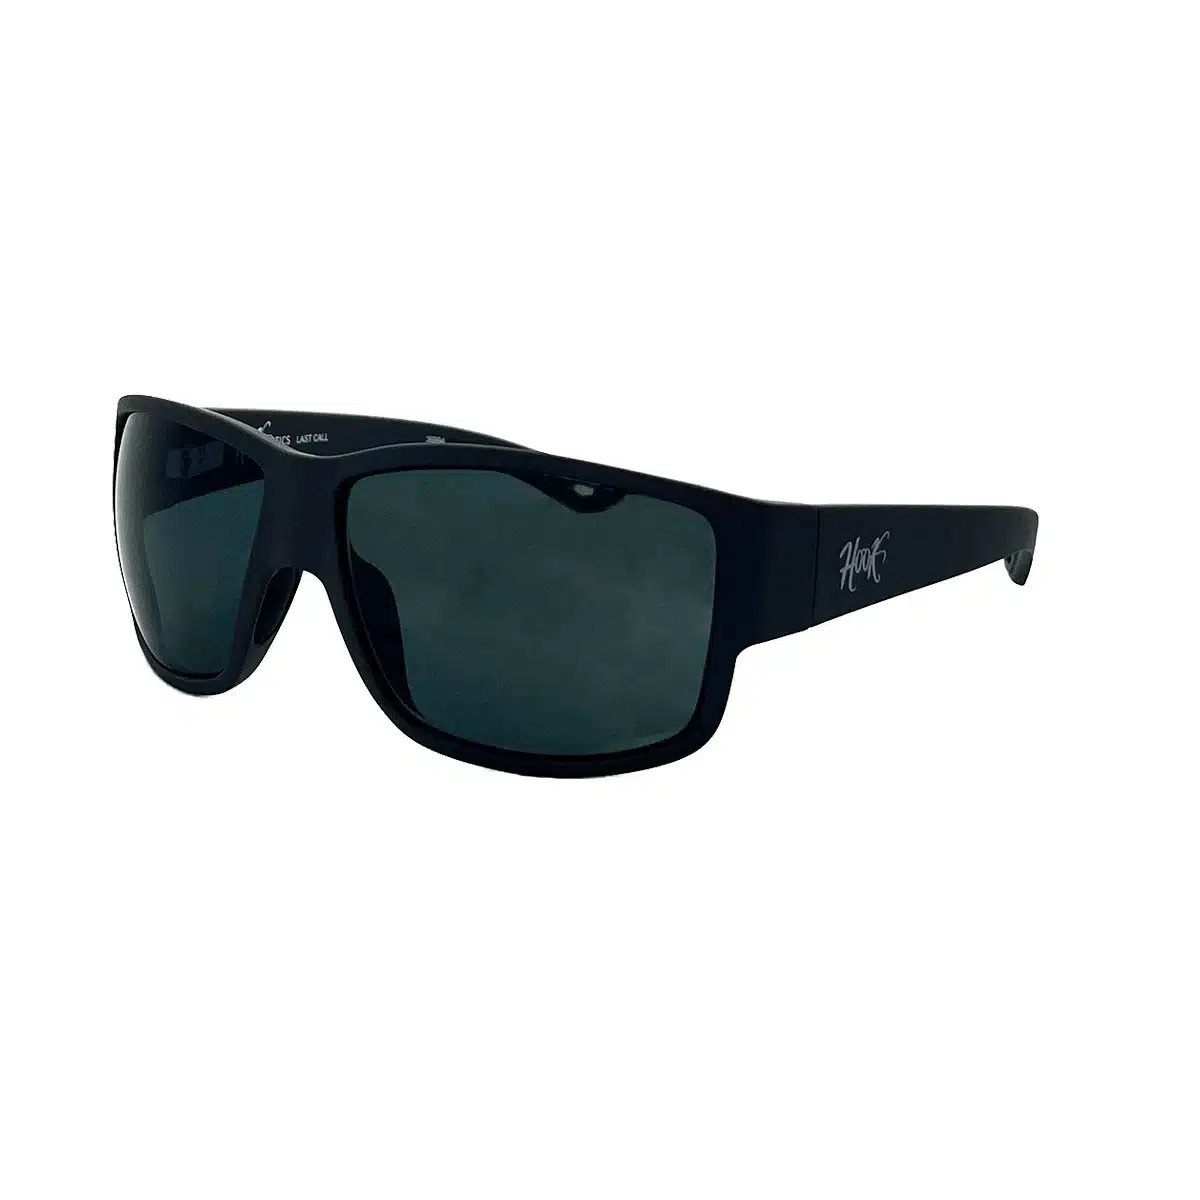 Last Call Hook Sunglasses XX Large fit Thermoforce Lenses by Zeiss